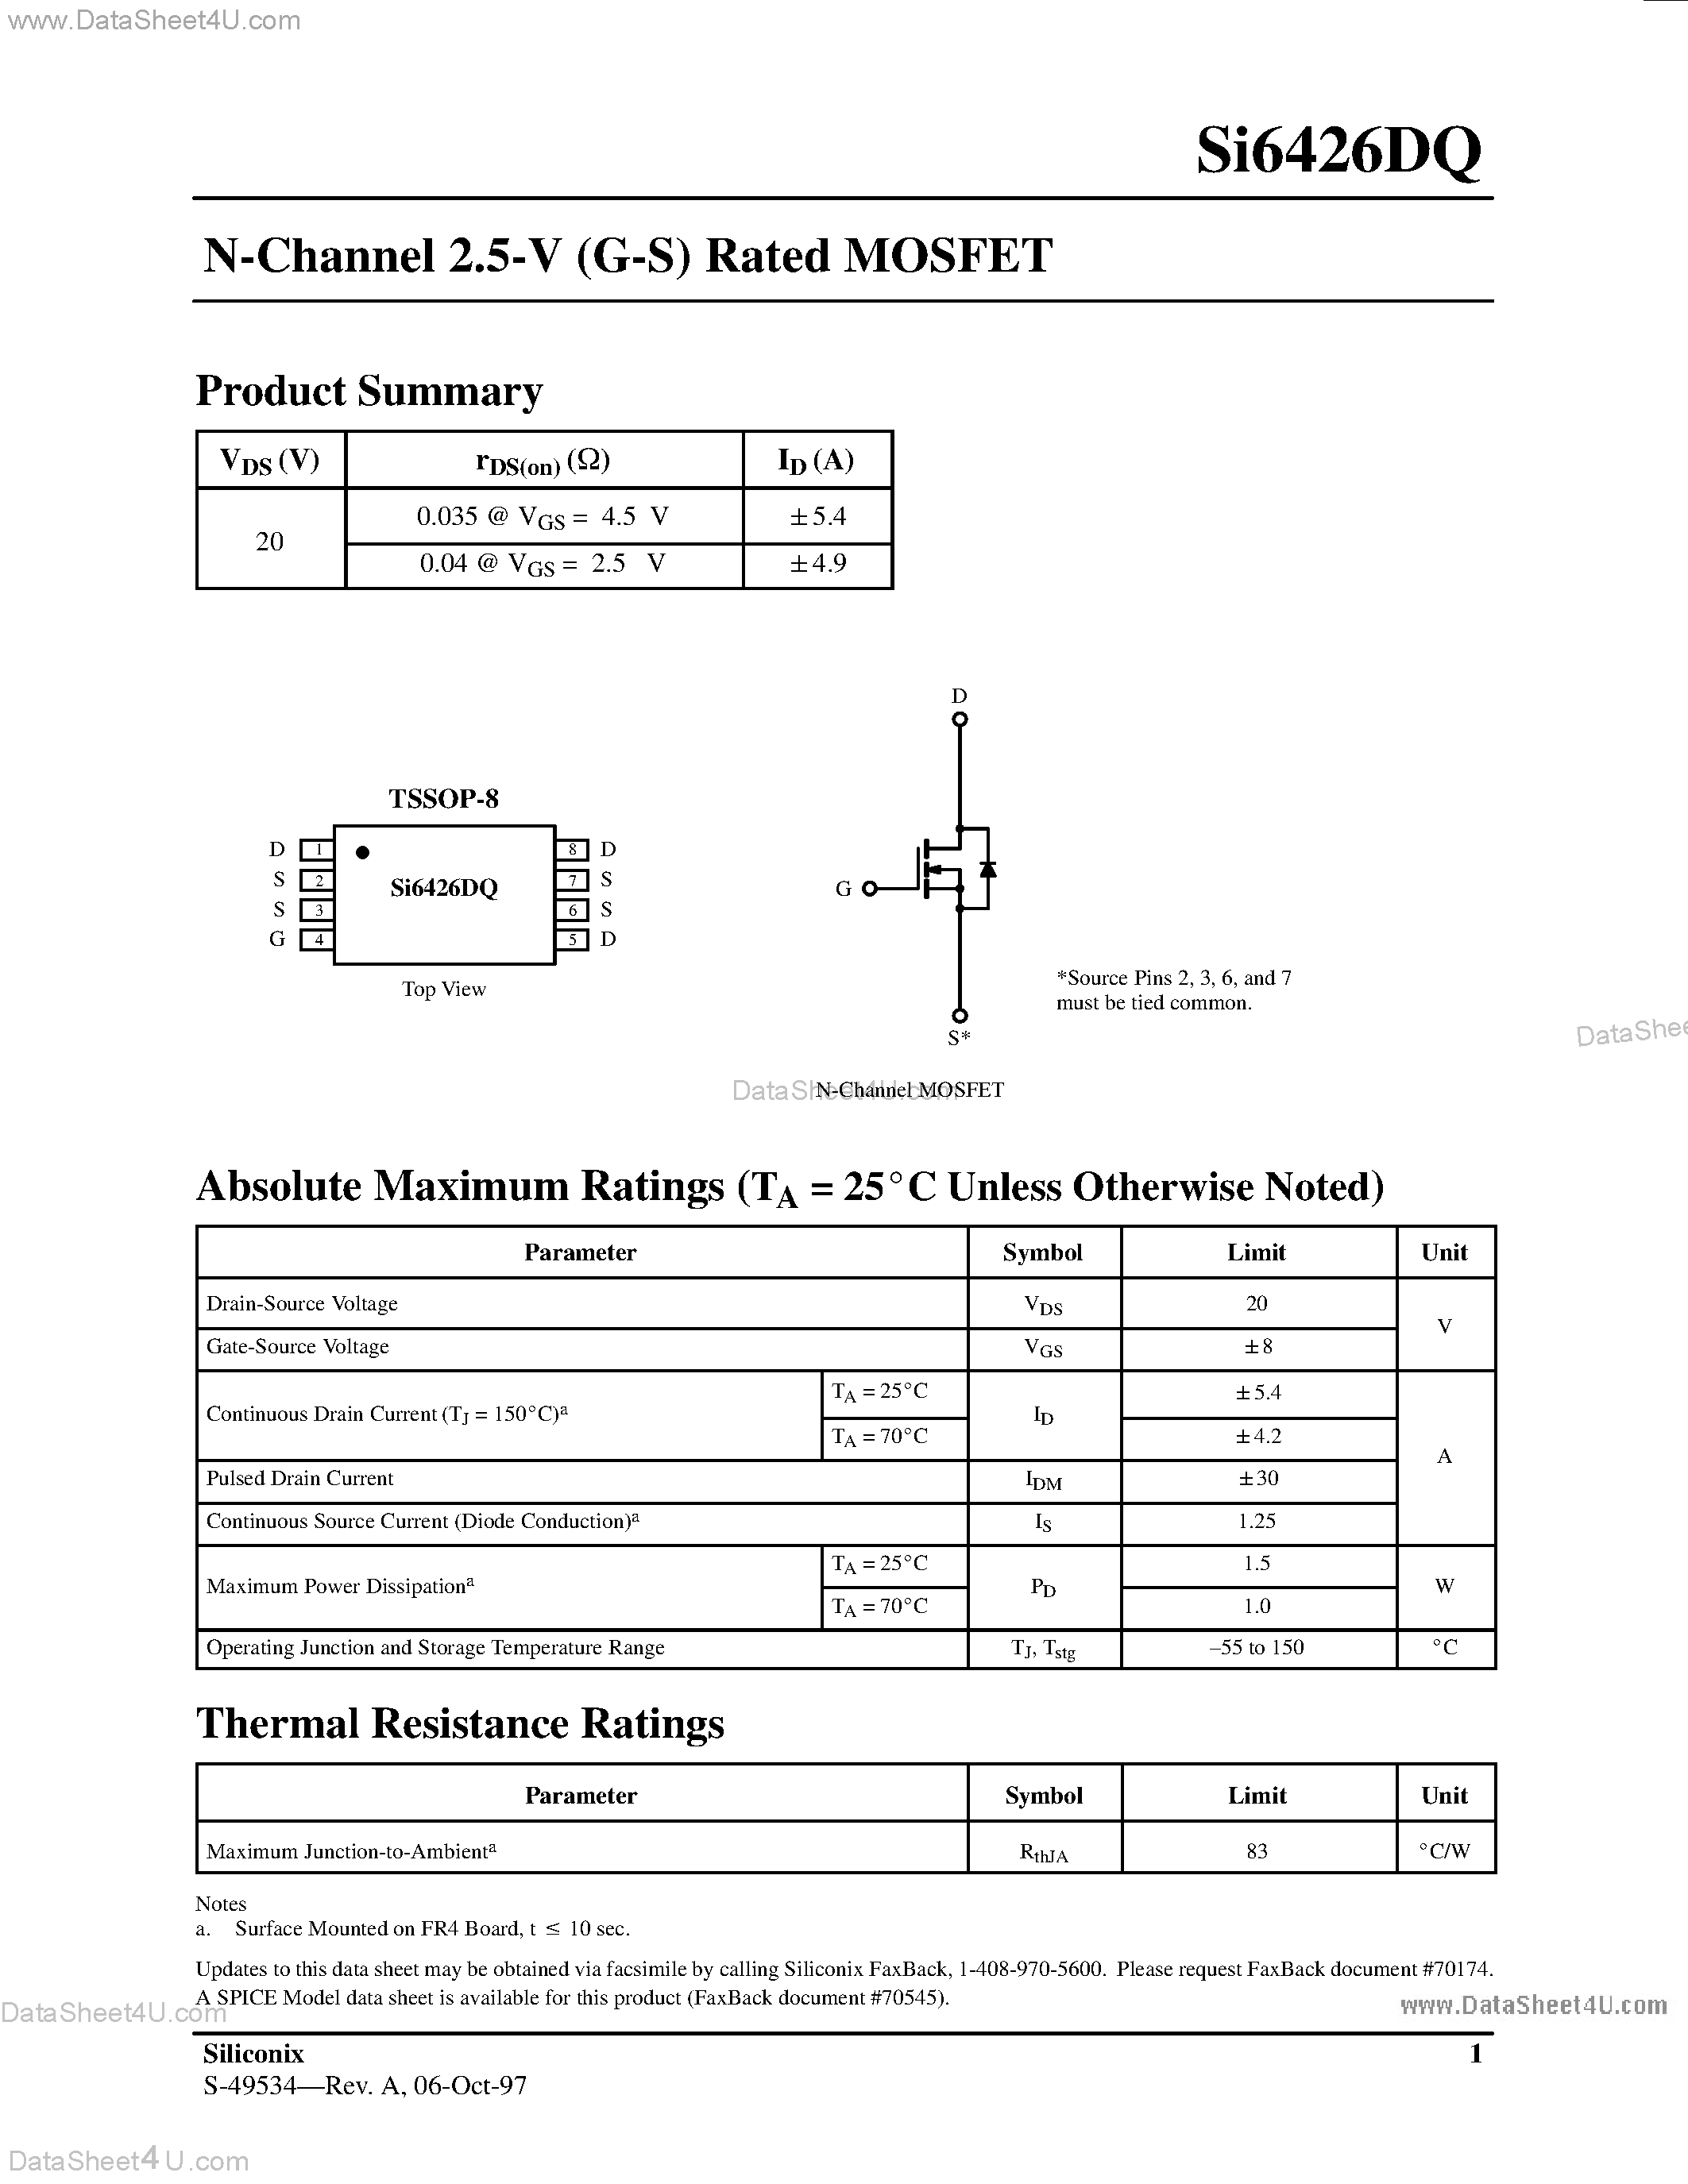 Datasheet SI426DQ - N-Channel 2.5-V (G-S) Rated MOSFET page 1